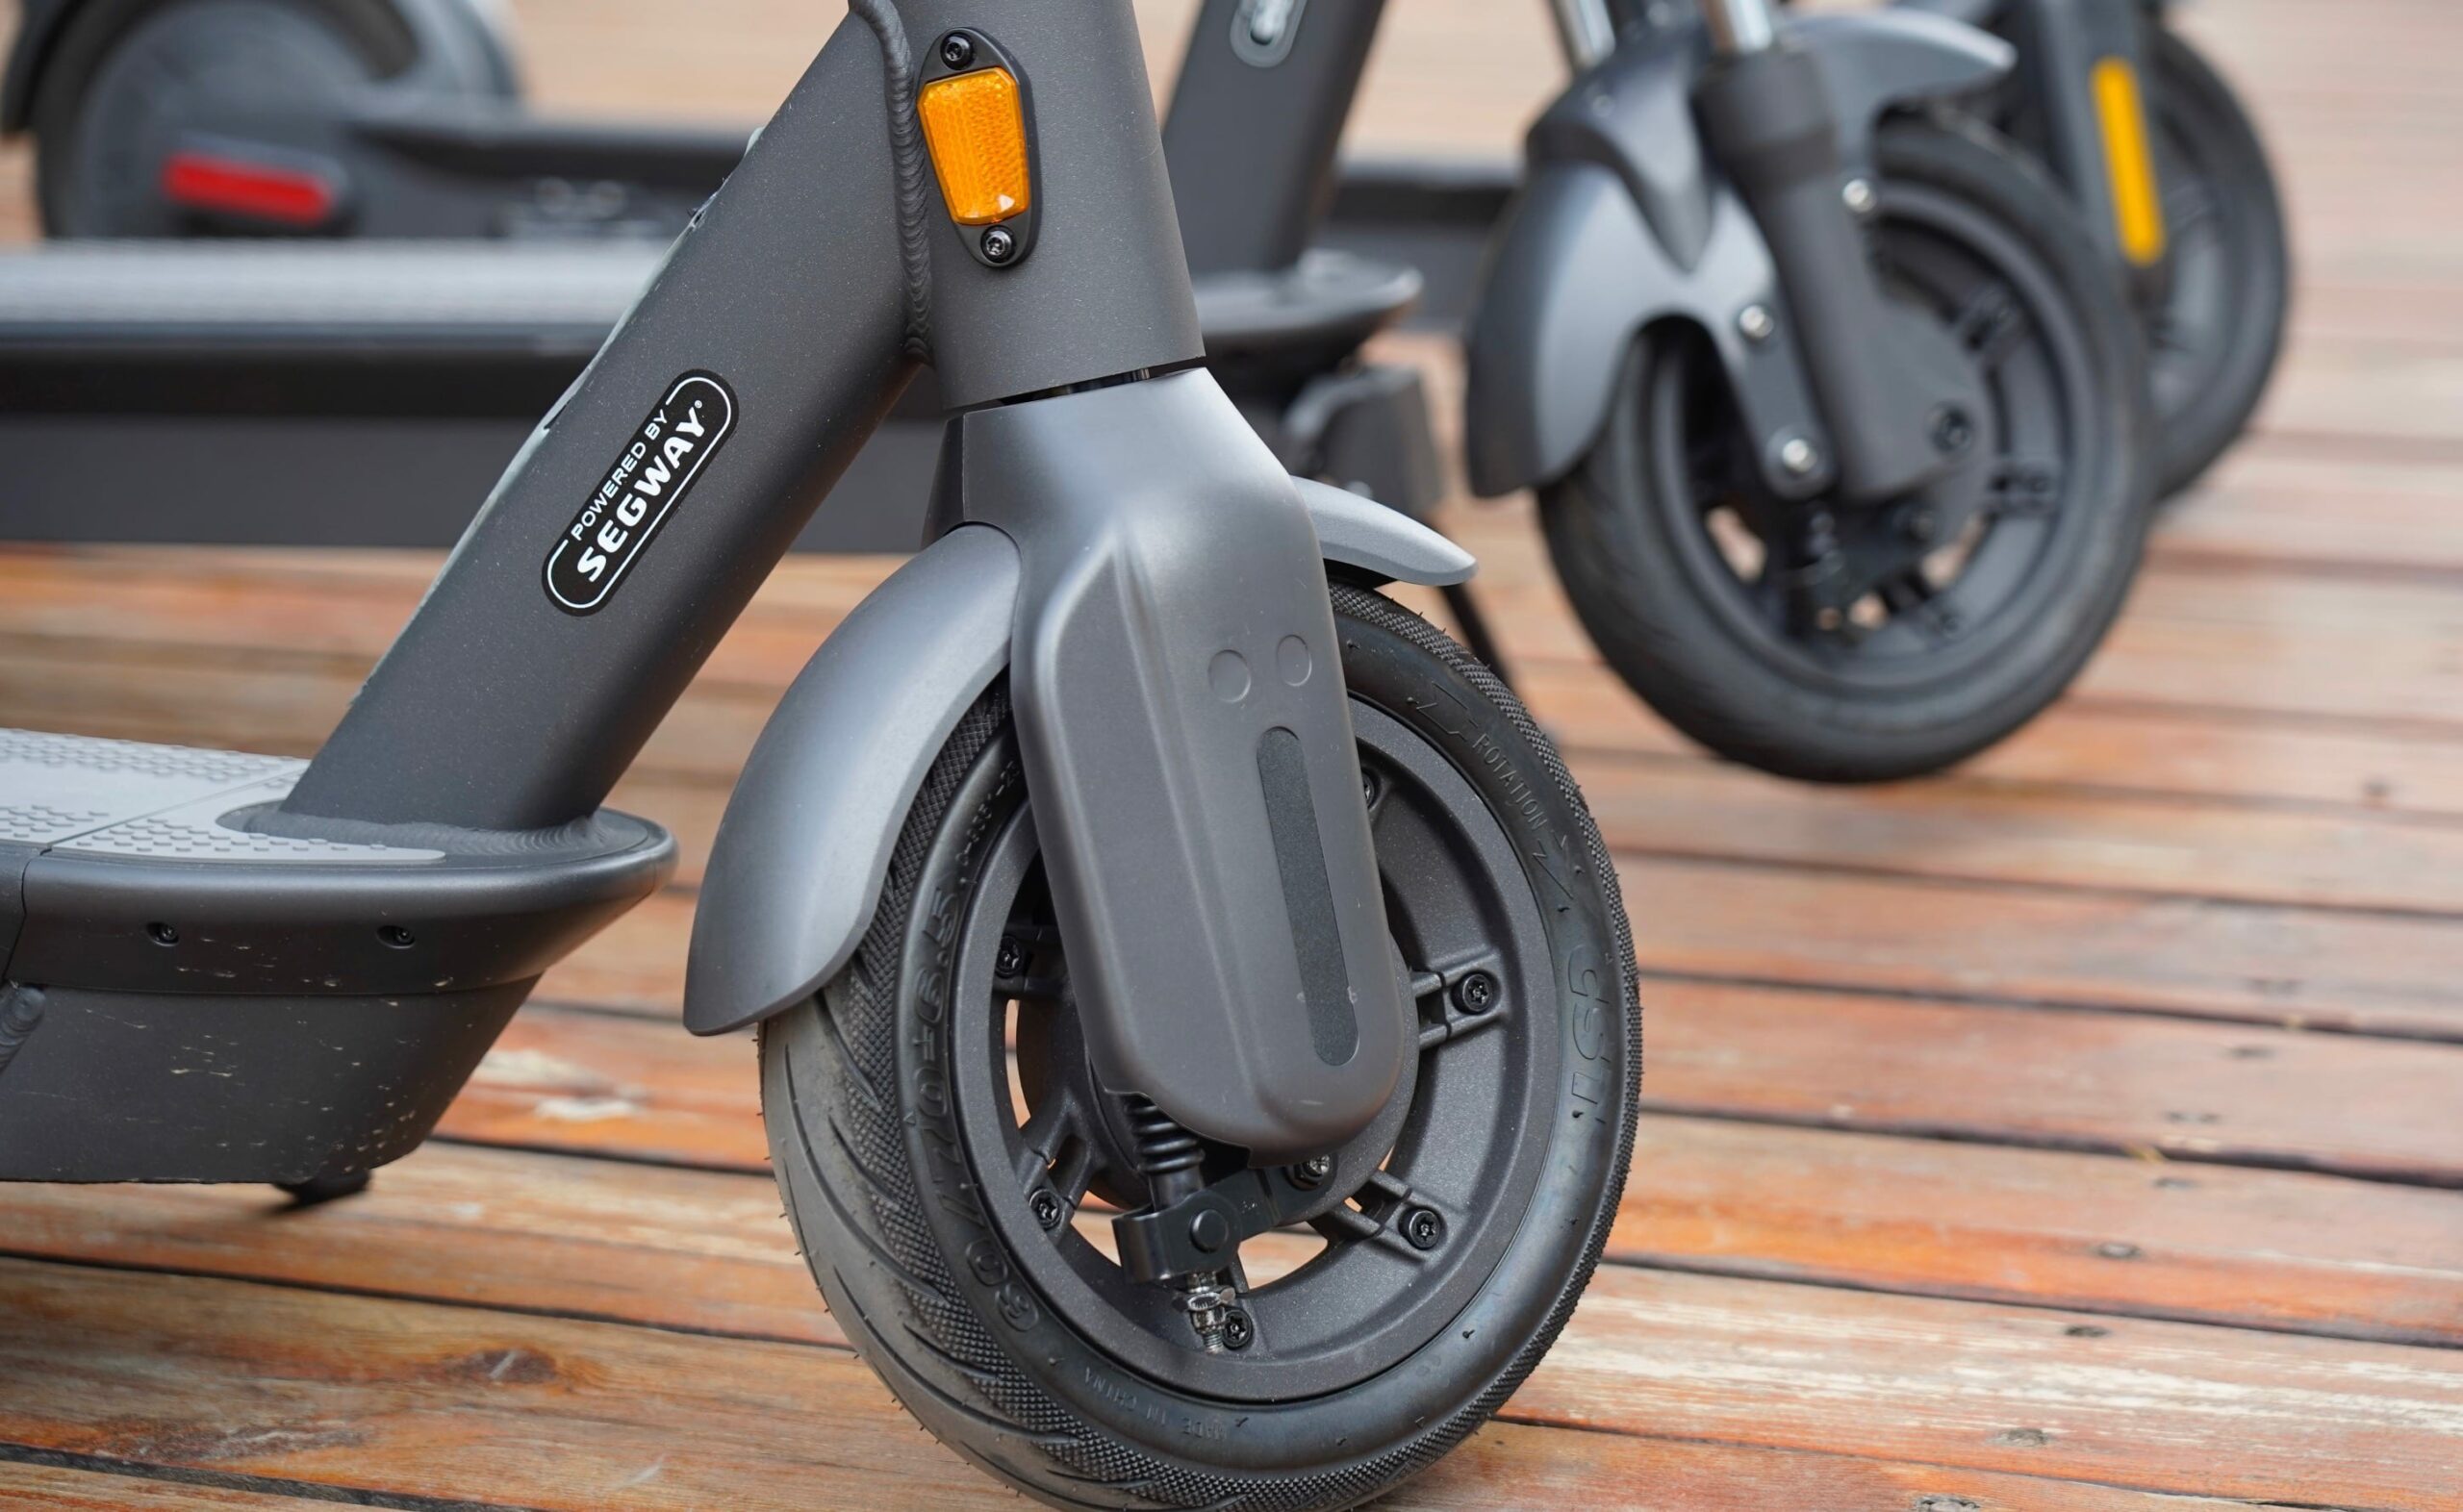 The need for speed: How Segway Joyride are quickly scooter startups market - Joyride